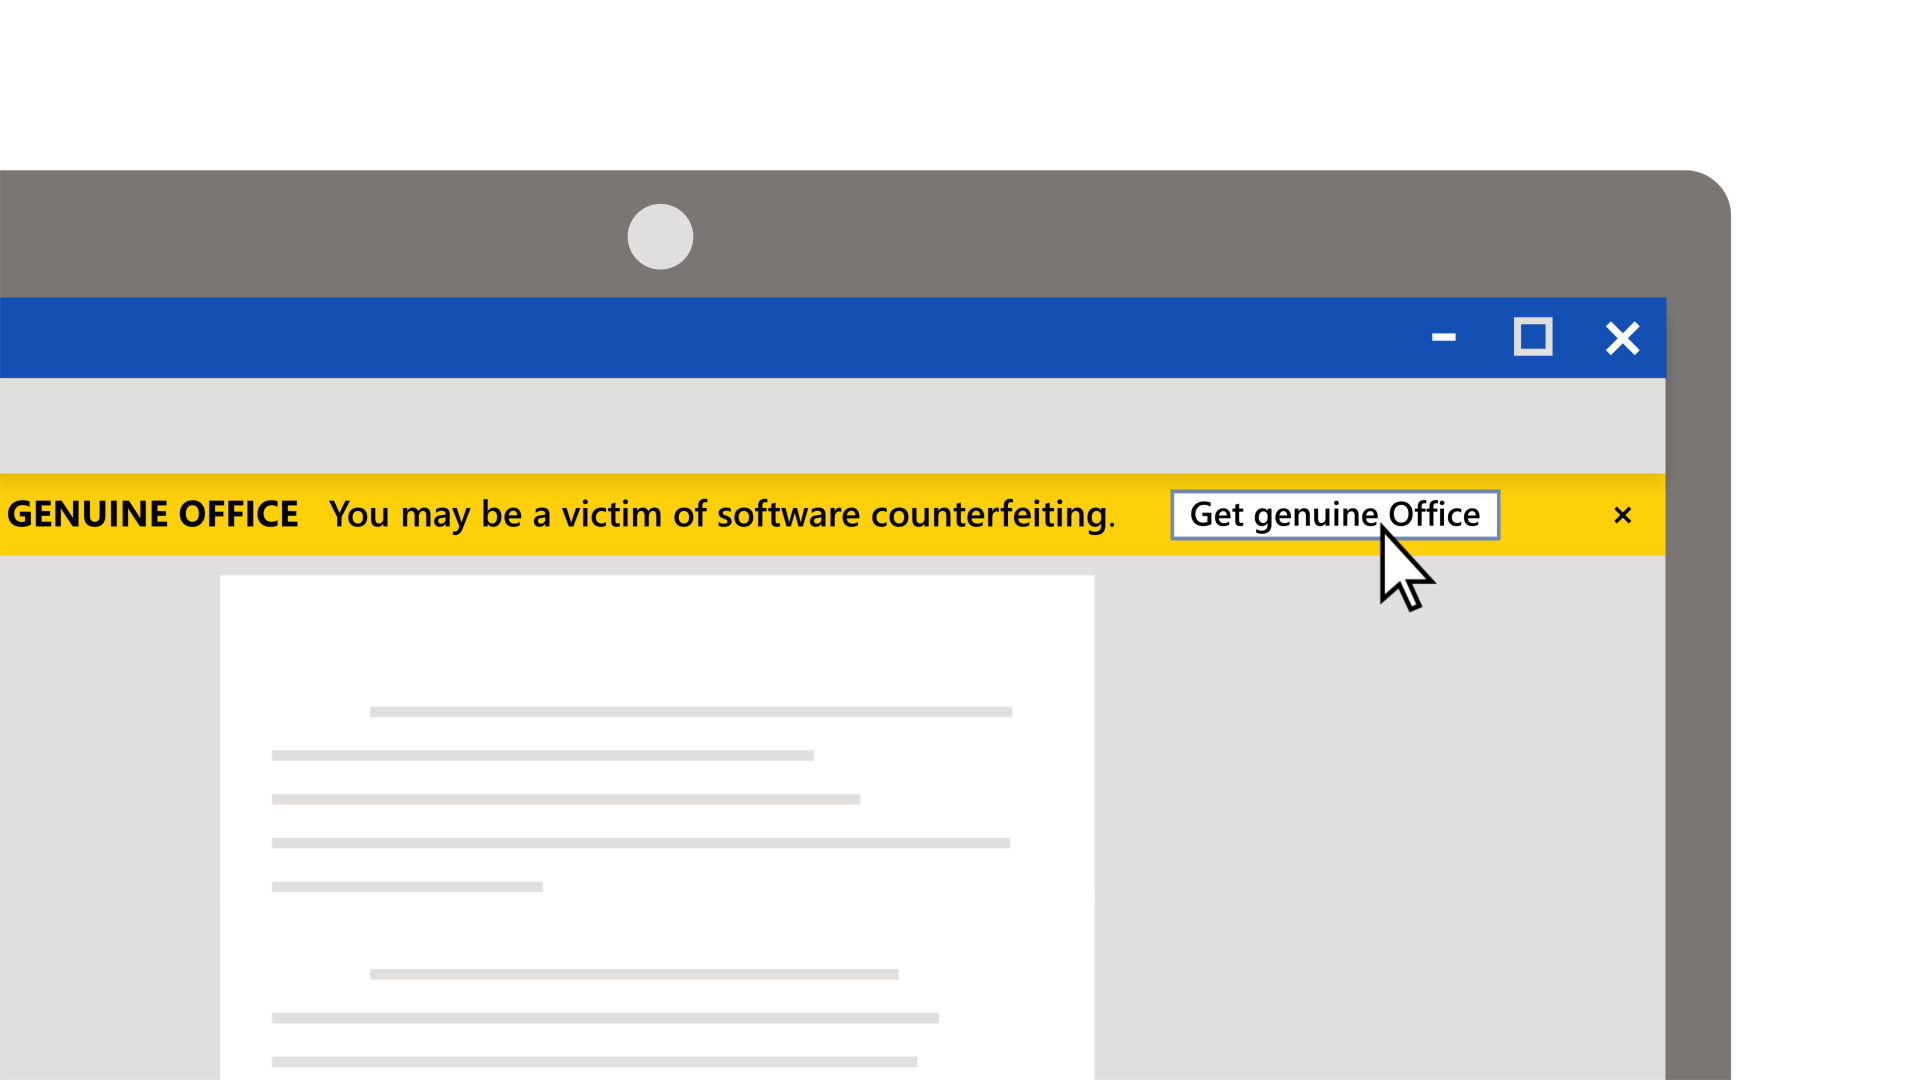 Stay safe with a genuine Office license - Microsoft Support